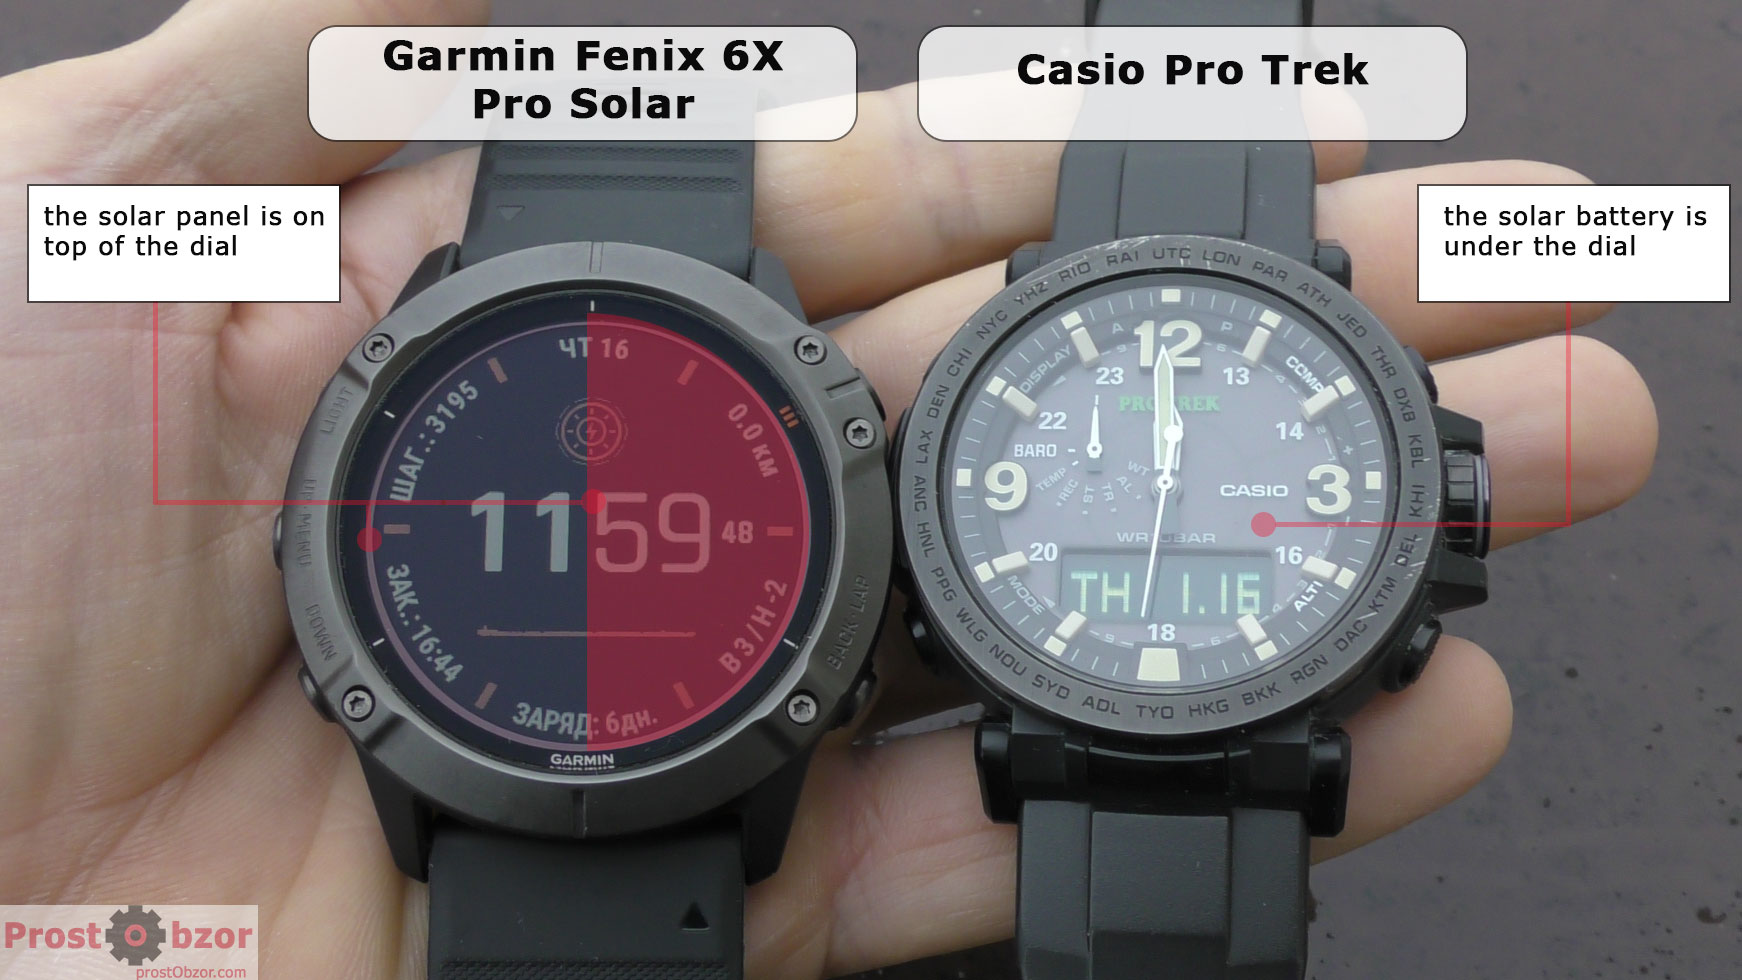 serie Invitere betalingsmiddel Garmin Fenix 6X Pro Solar comparison and test in the detailed review